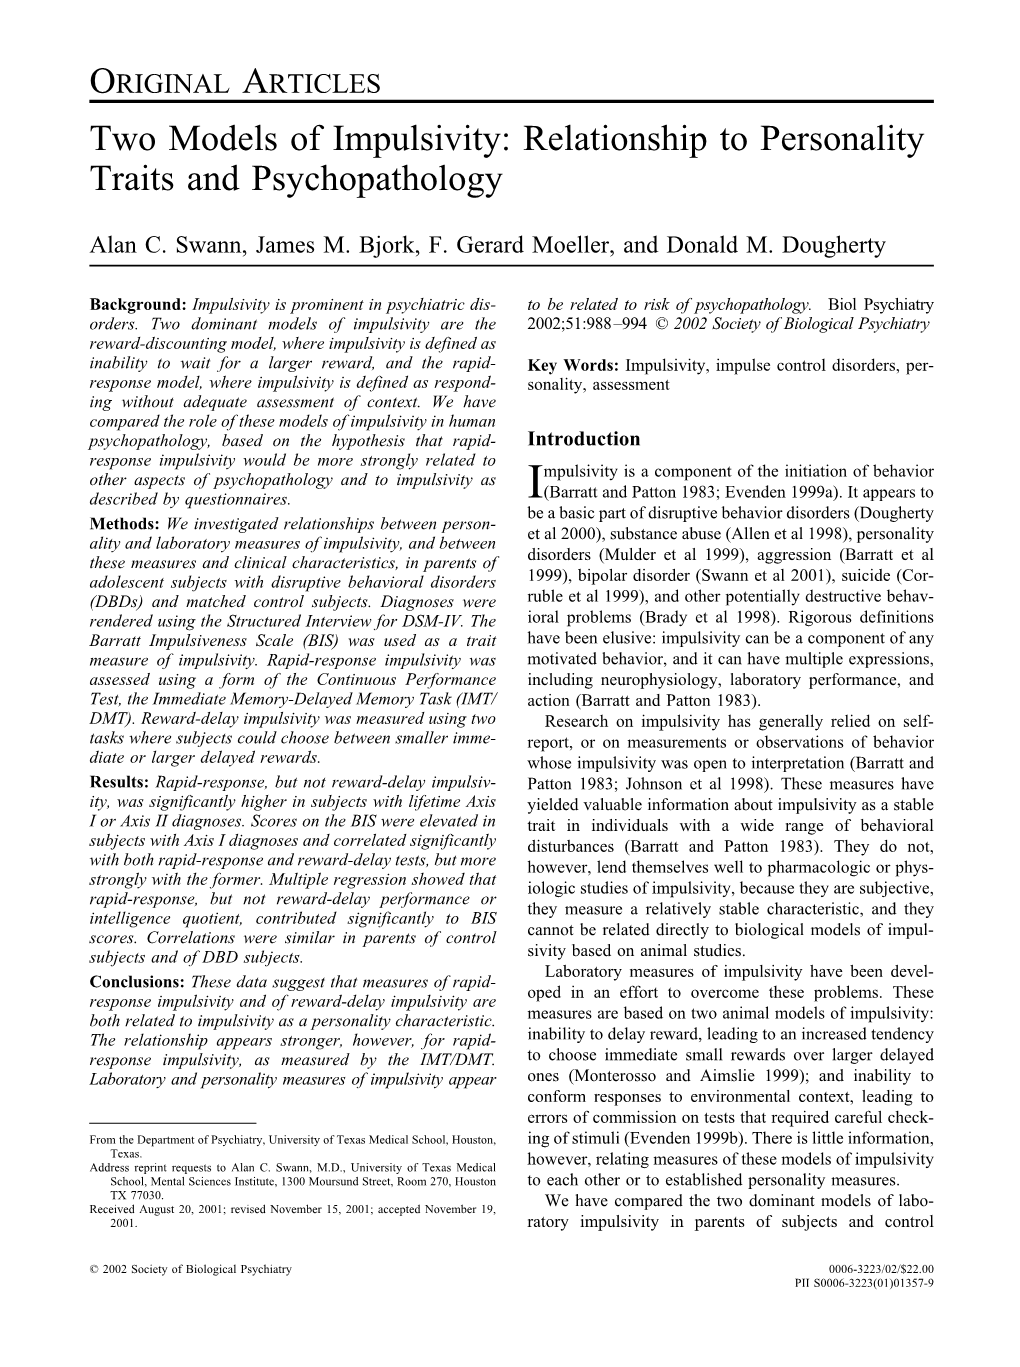 Two Models of Impulsivity: Relationship to Personality Traits and Psychopathology